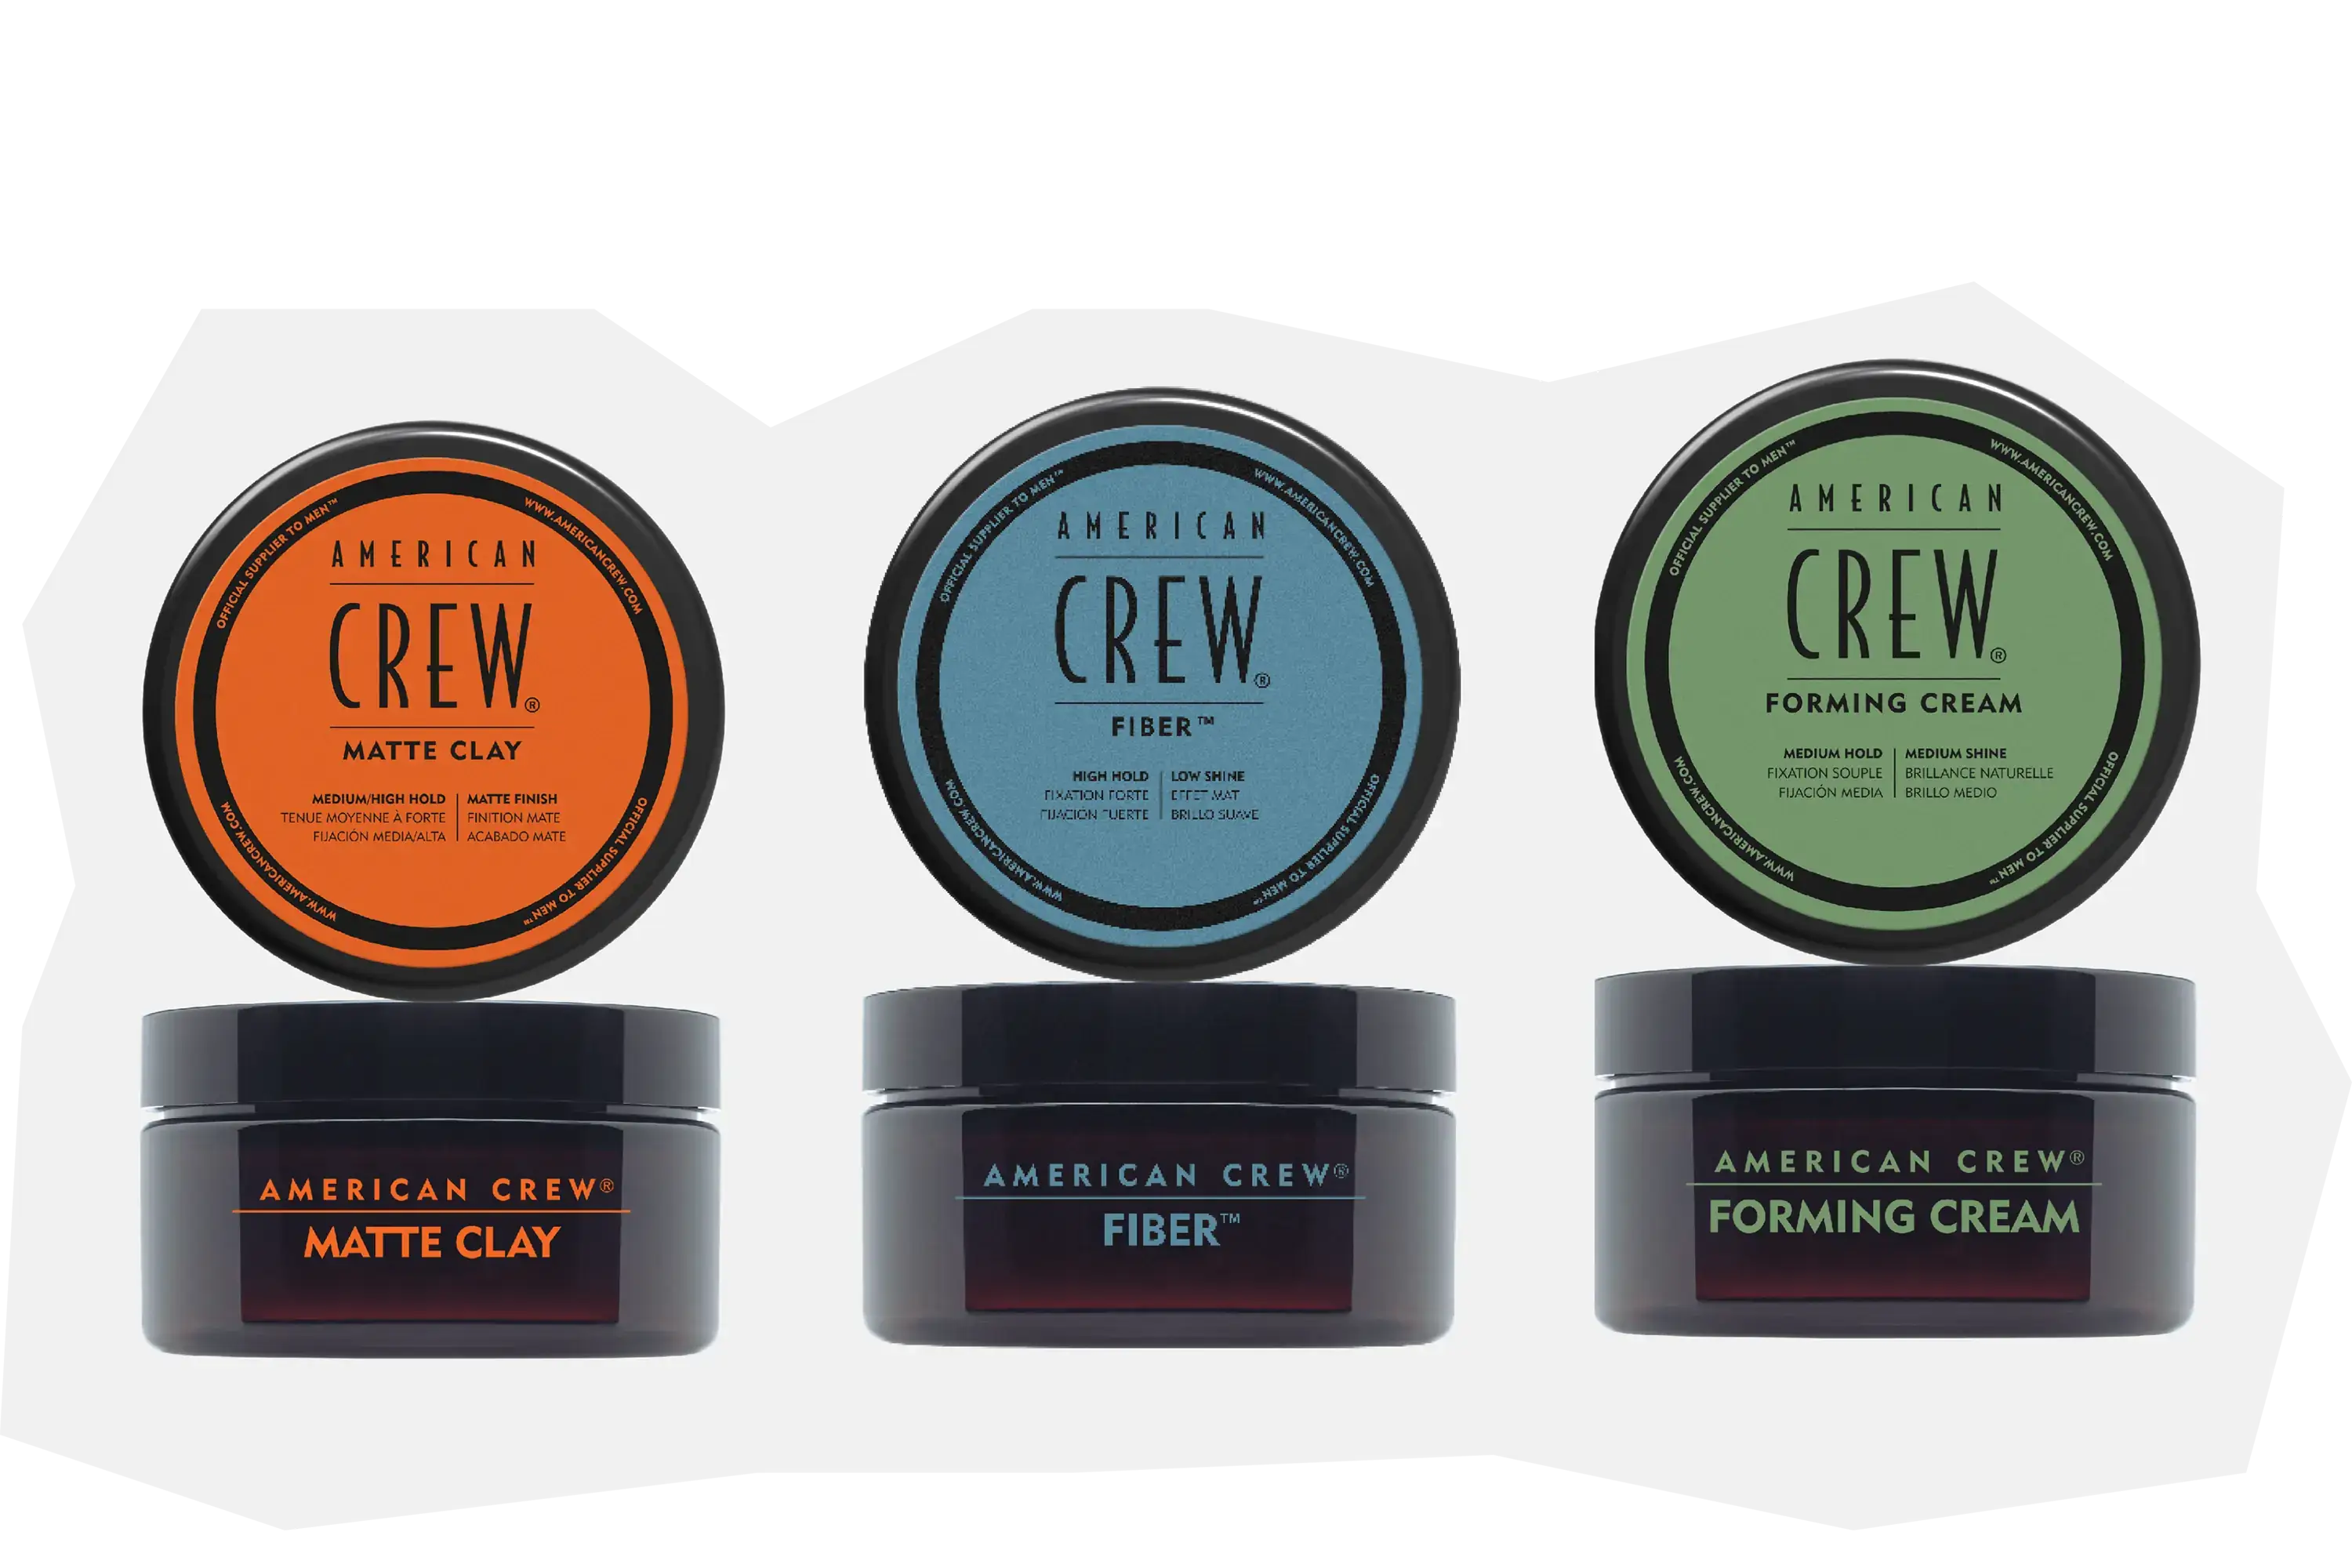 Men's Grooming Products from American Crew